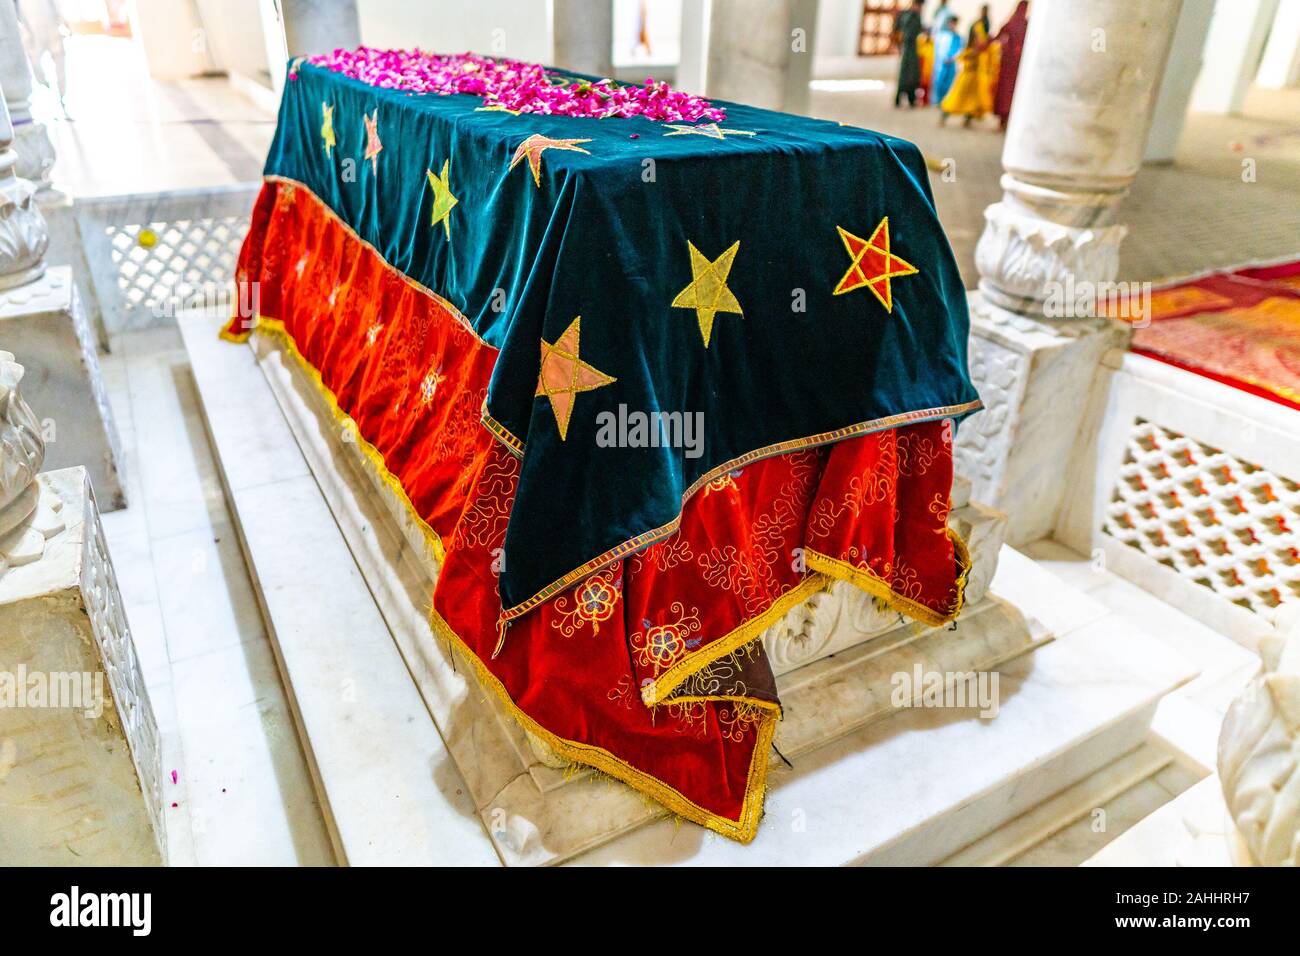 Larkana Bhutto Family Mausoleum Picturesque Interior View of a Martyr Shaheed Tomb Covered with Arabic Urdu Script Stock Photo